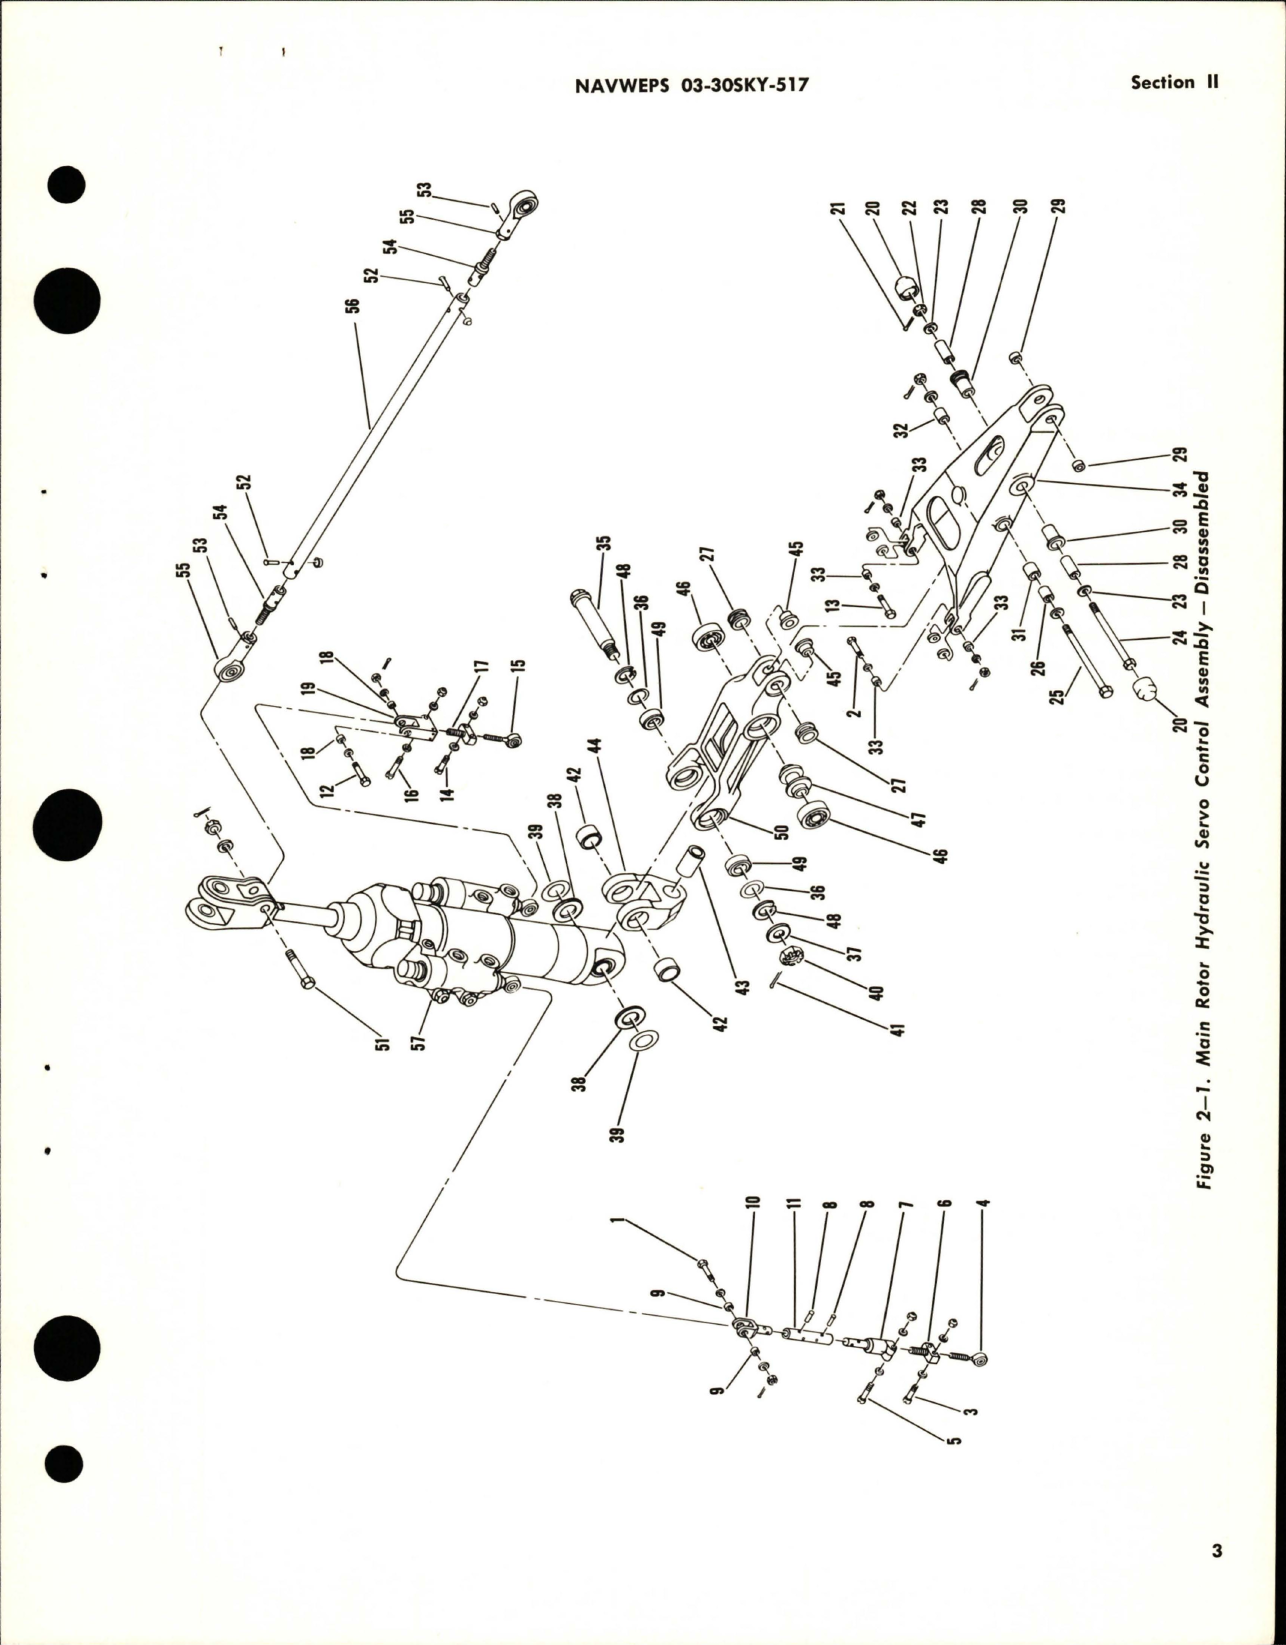 Sample page 7 from AirCorps Library document: Overhaul Instructions for Main Rotor Hydraulic Servo Control Assembly - Parts S1565-20270, S1565-20270-2, S1565-20270-4, and S1565-20270-6